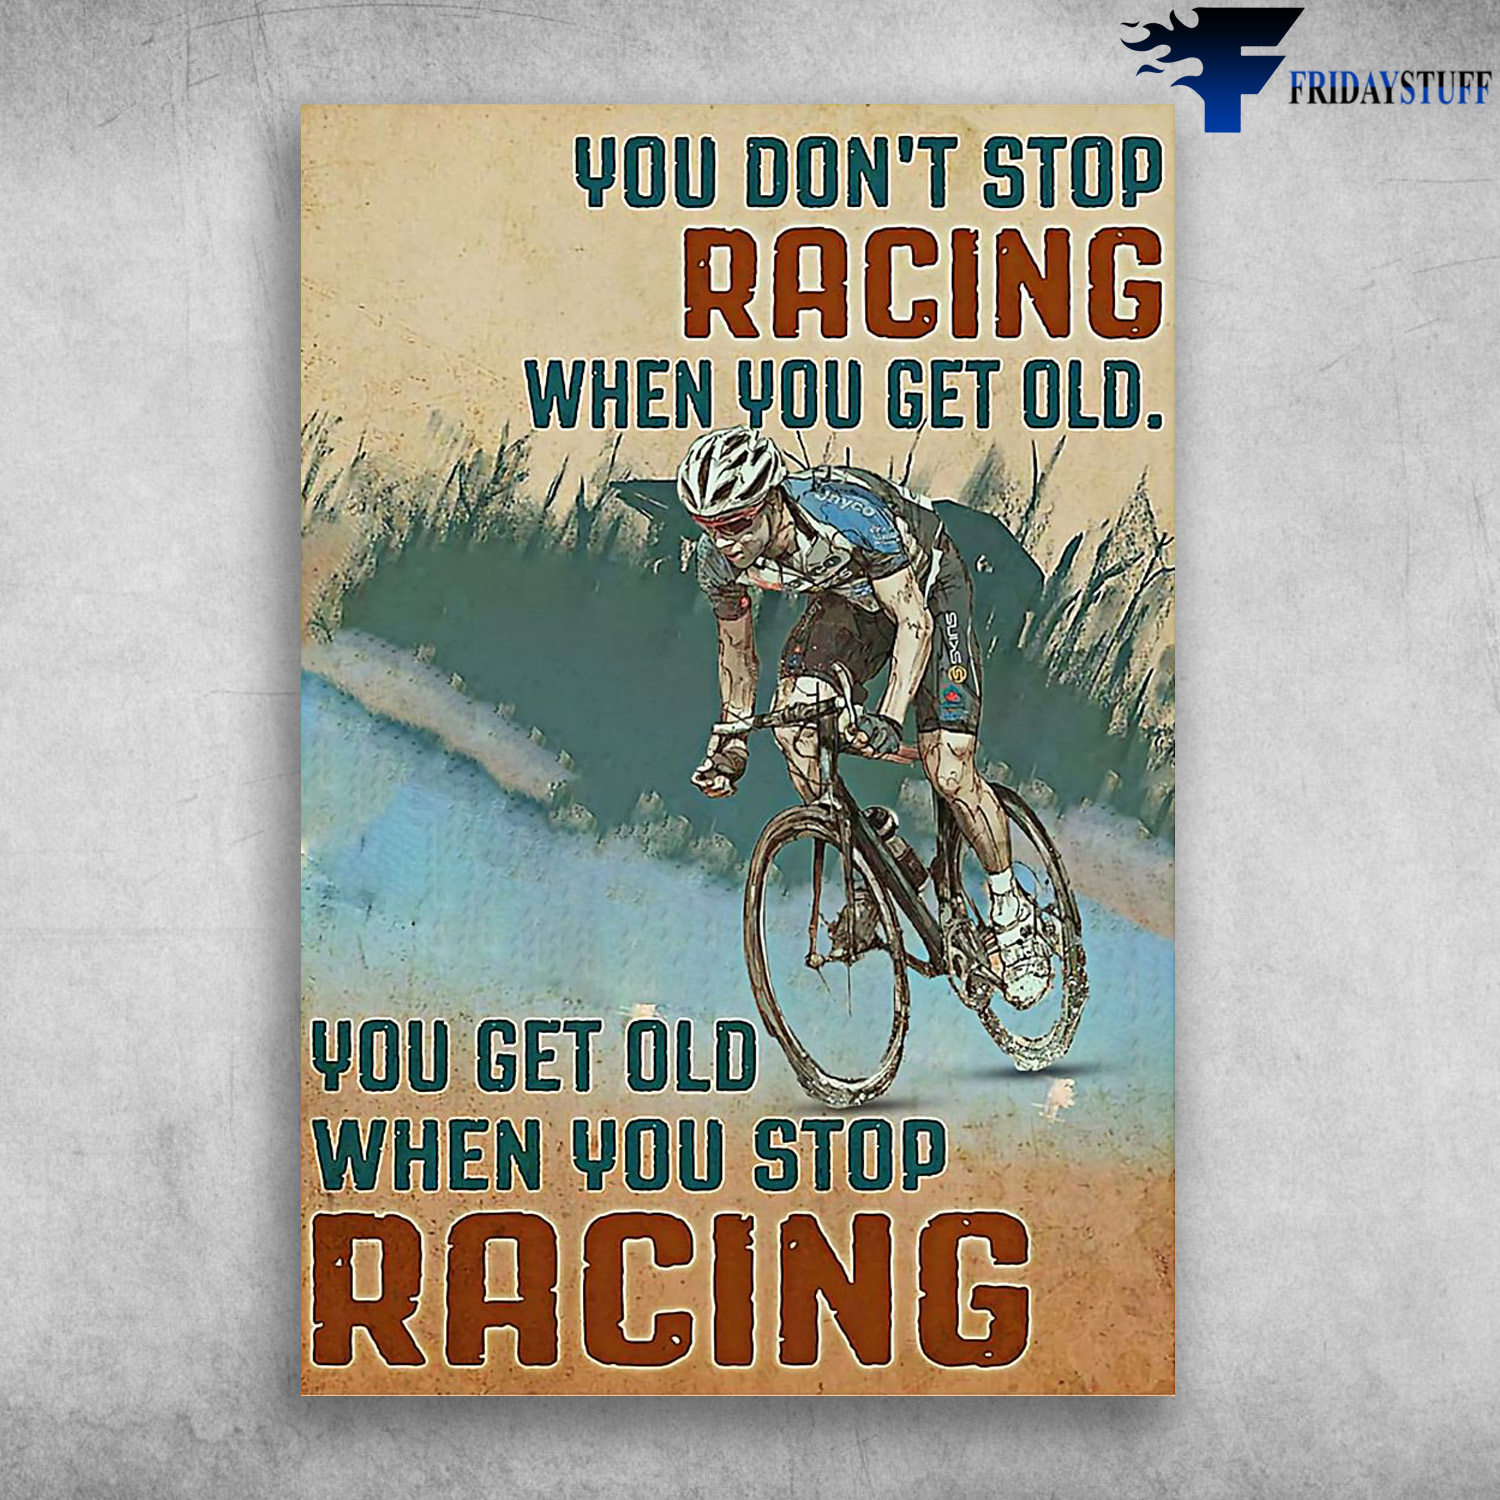 Man Riding Bicycle - You Don't Stop Racing When You Get Old, You Get Old When You Stop Racing